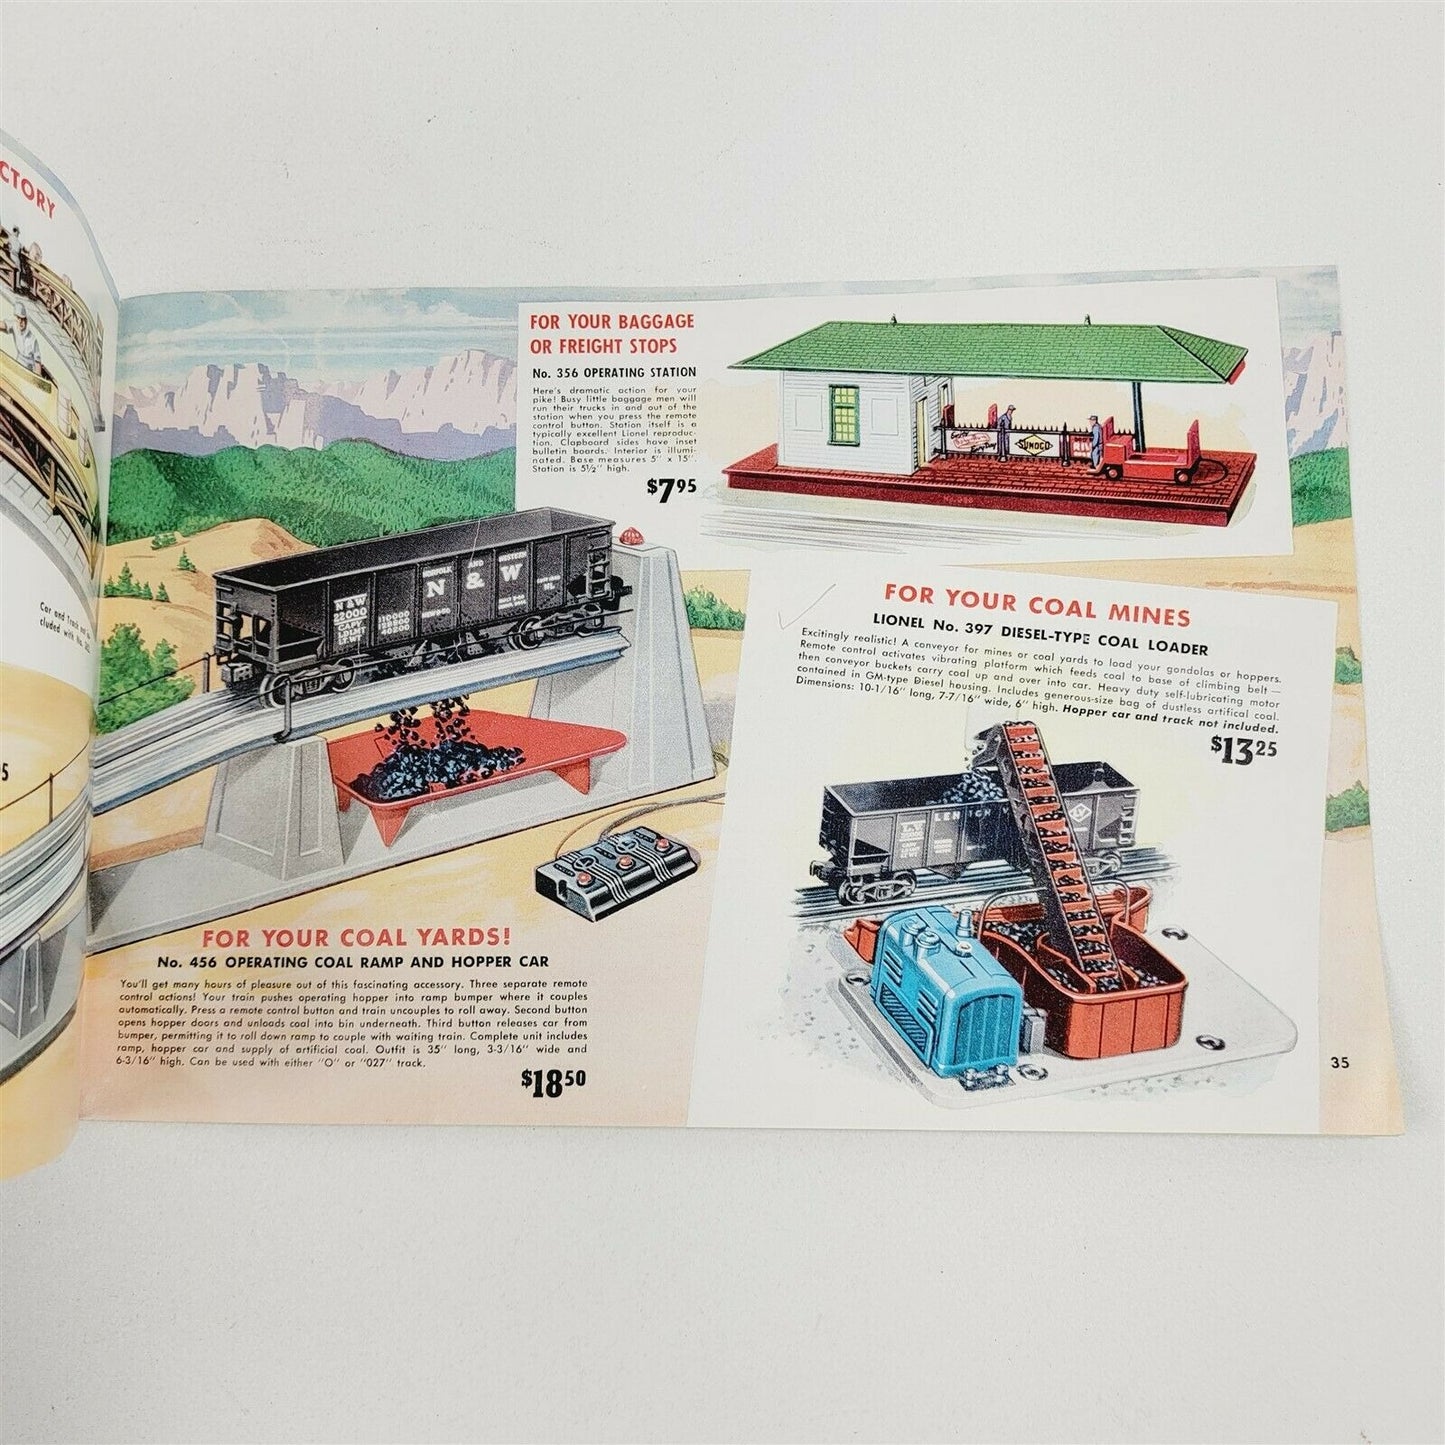 2 1953 Lionel Electric Toy Train Catalogs Garstang's Trains & Toys Pasadena CA